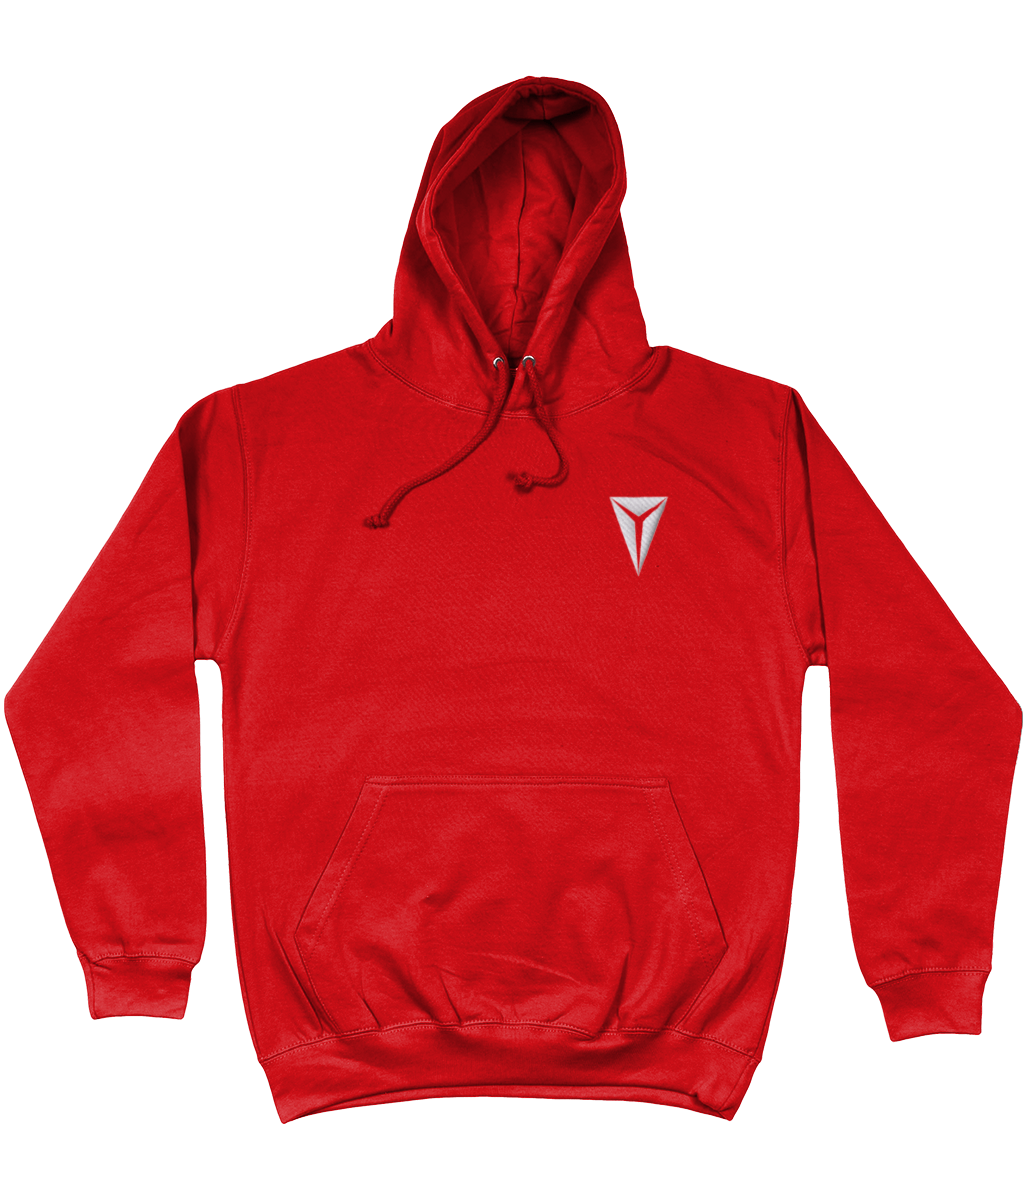 HEX AWDis College Hoodie Embroidered with White Dragon Eye Logo Fire Red